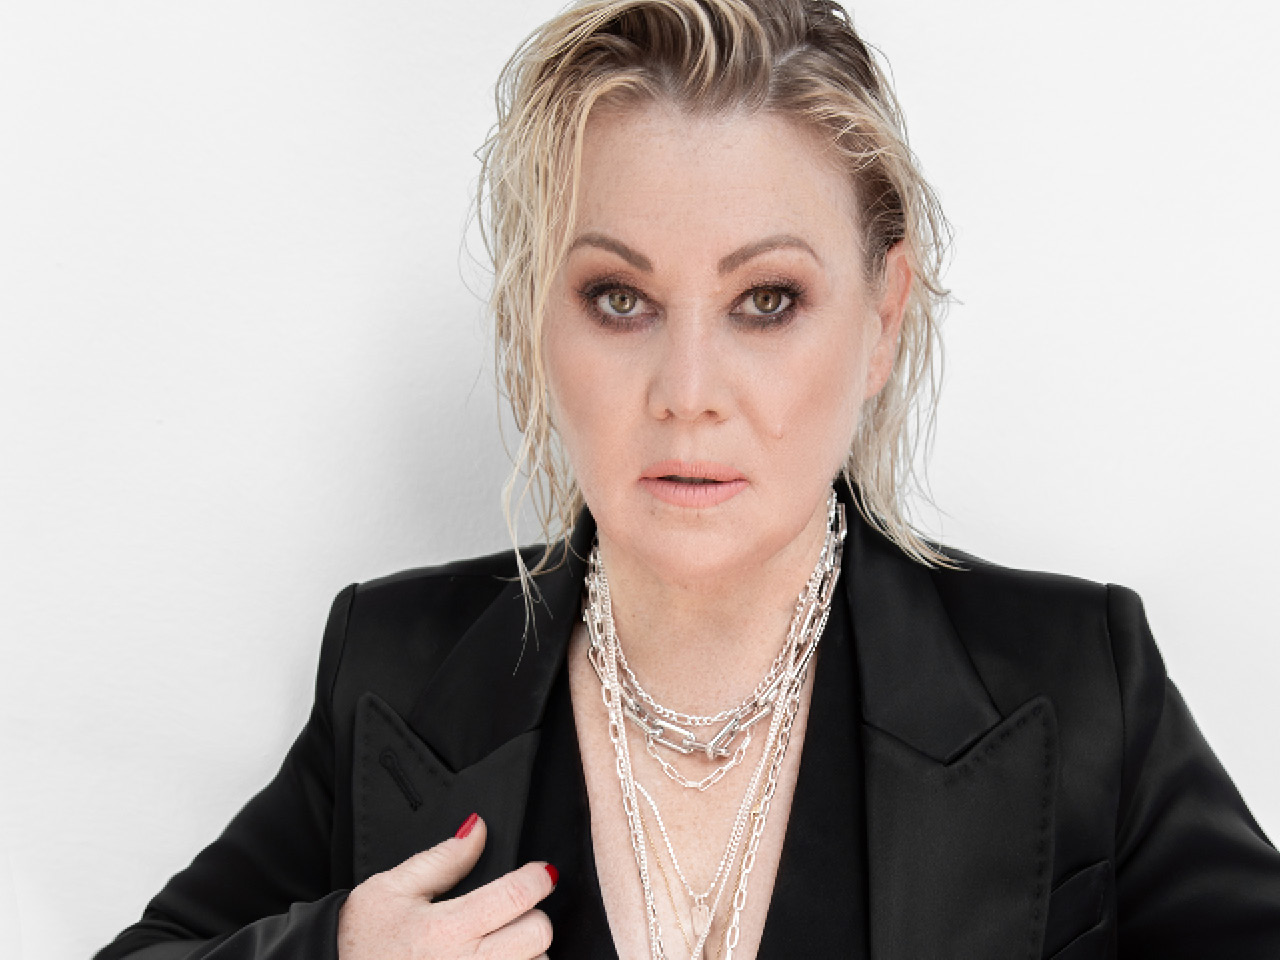 Jann Arden looking into the camera, standing in front of a white background wearing a black blazer and layered chain necklaces.